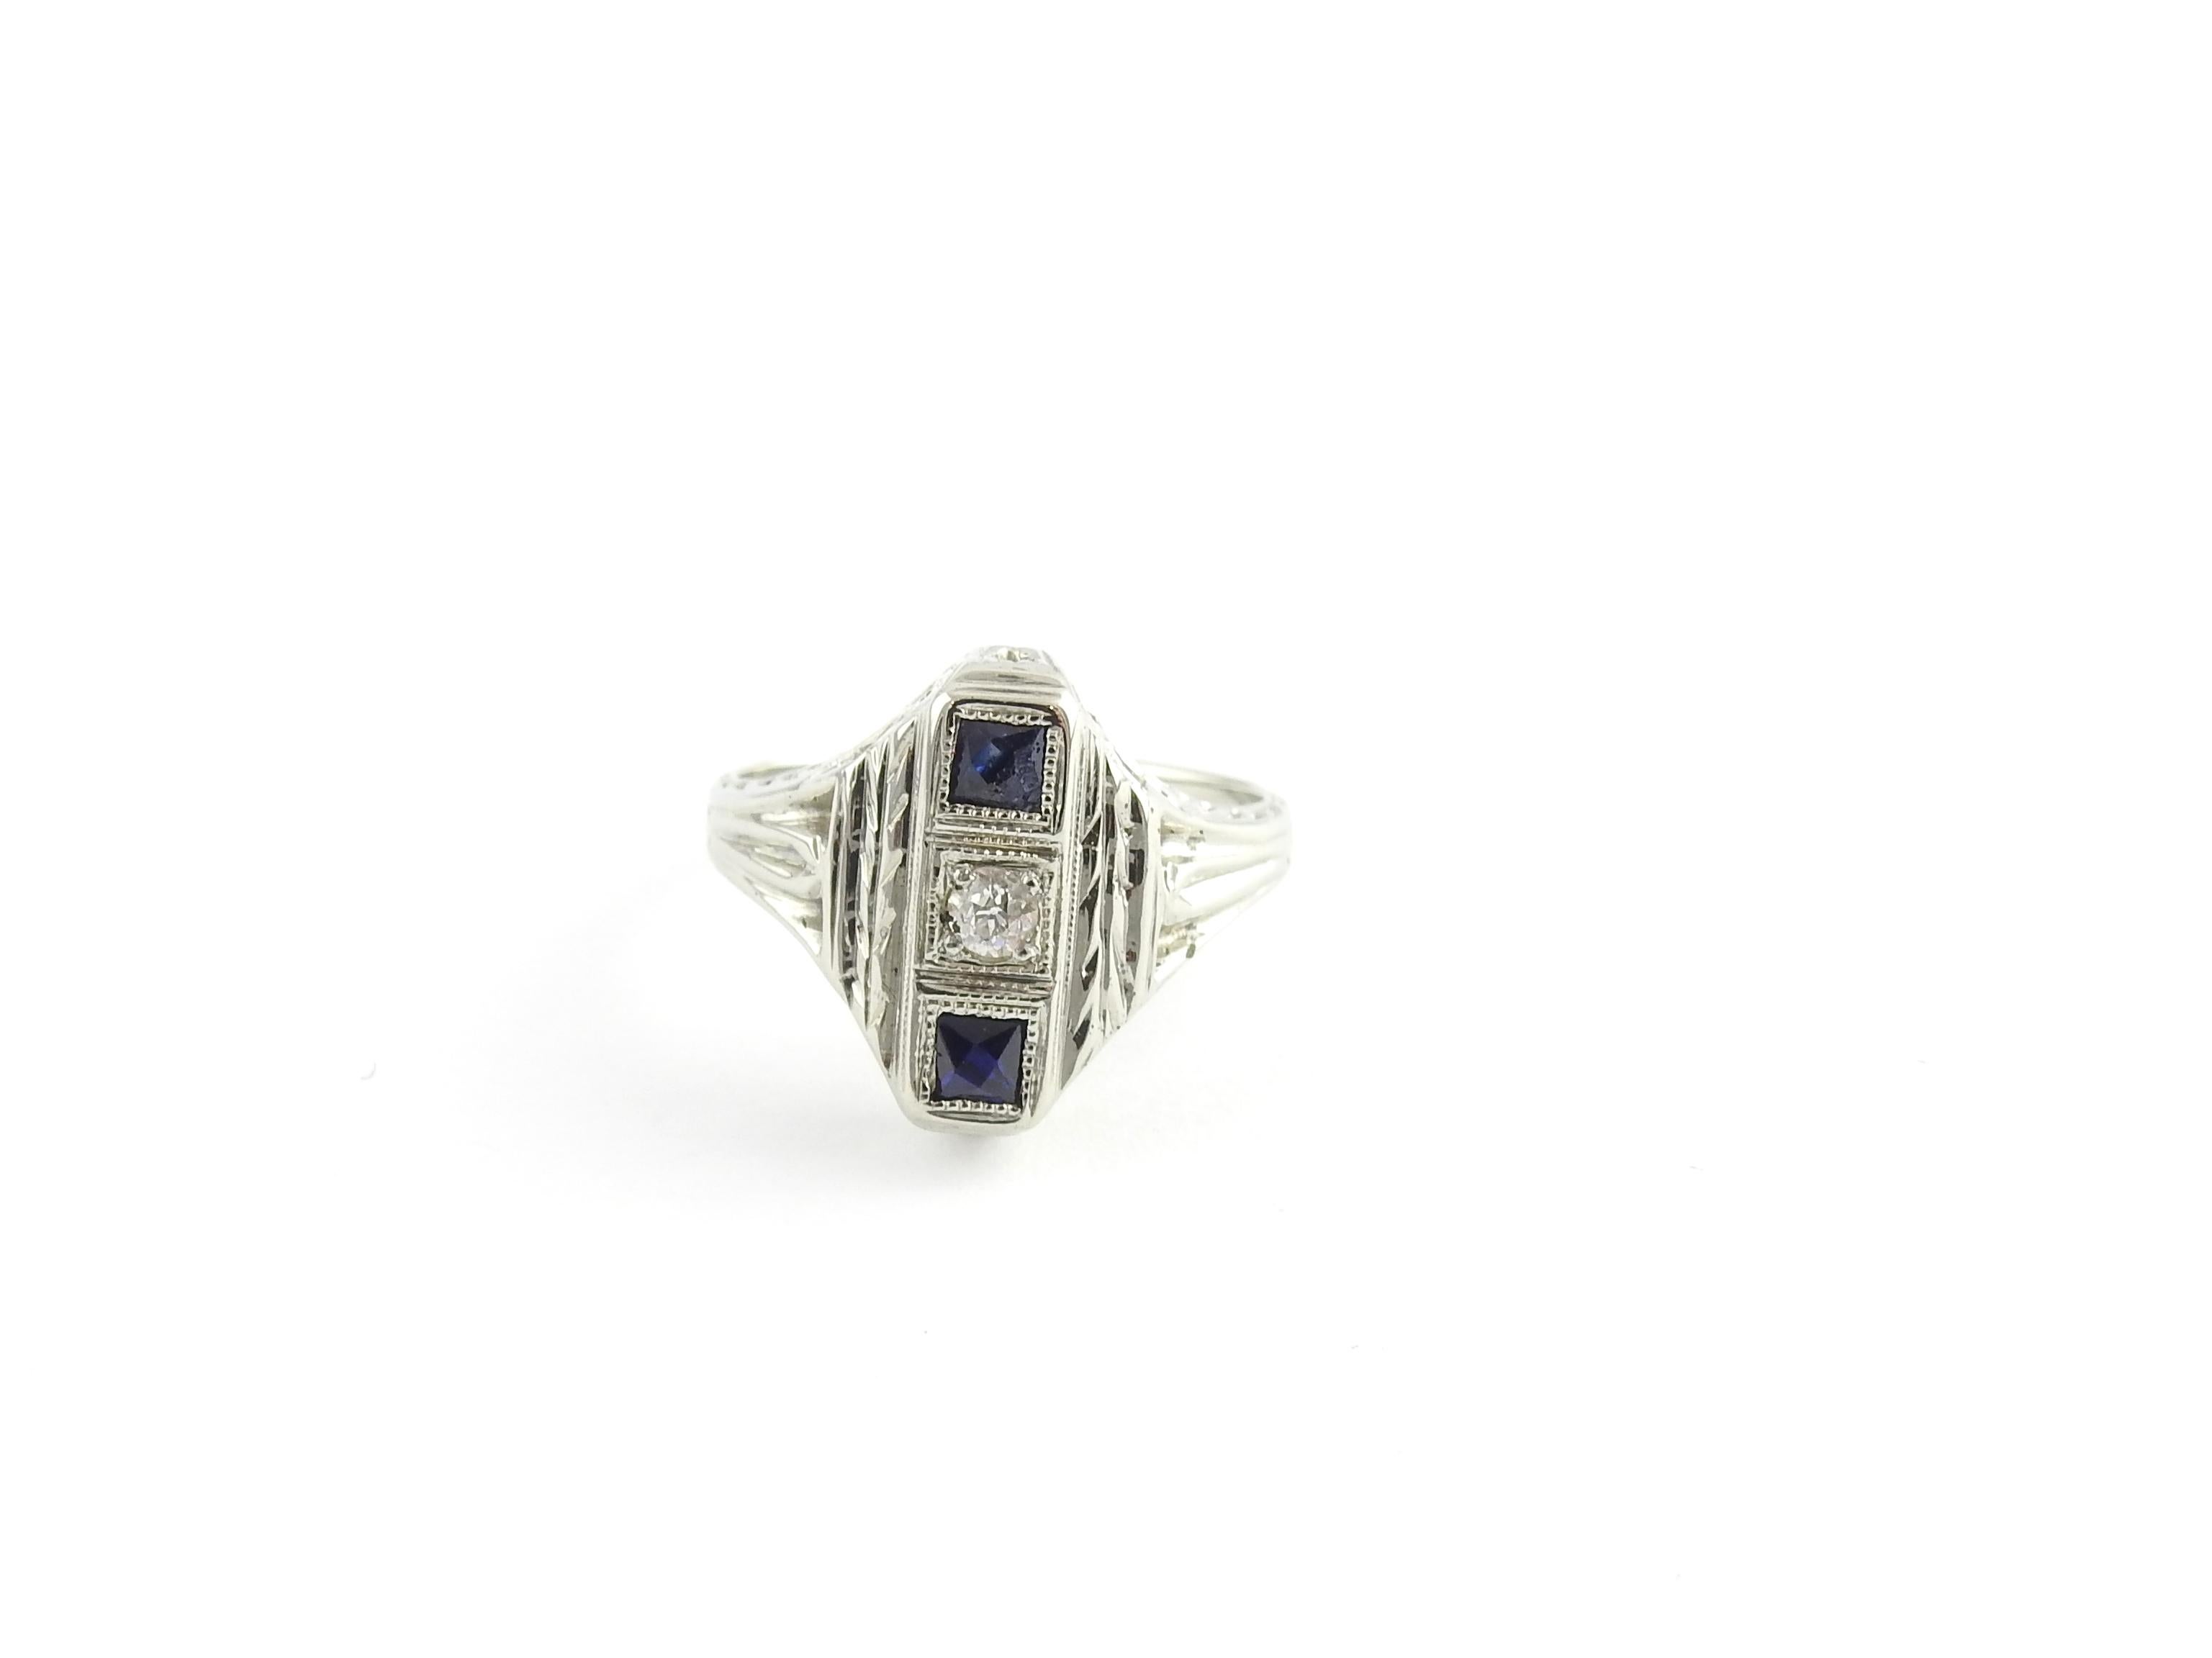 Vintage 18 Karat White Gold Genuine Sapphire and Diamond Ring Size 3.25

This stunning ring features one round European cut diamond and two genuine square sapphire set in beautifully detailed white gold filigree. Top of ring measures 13 mm x 10 mm.